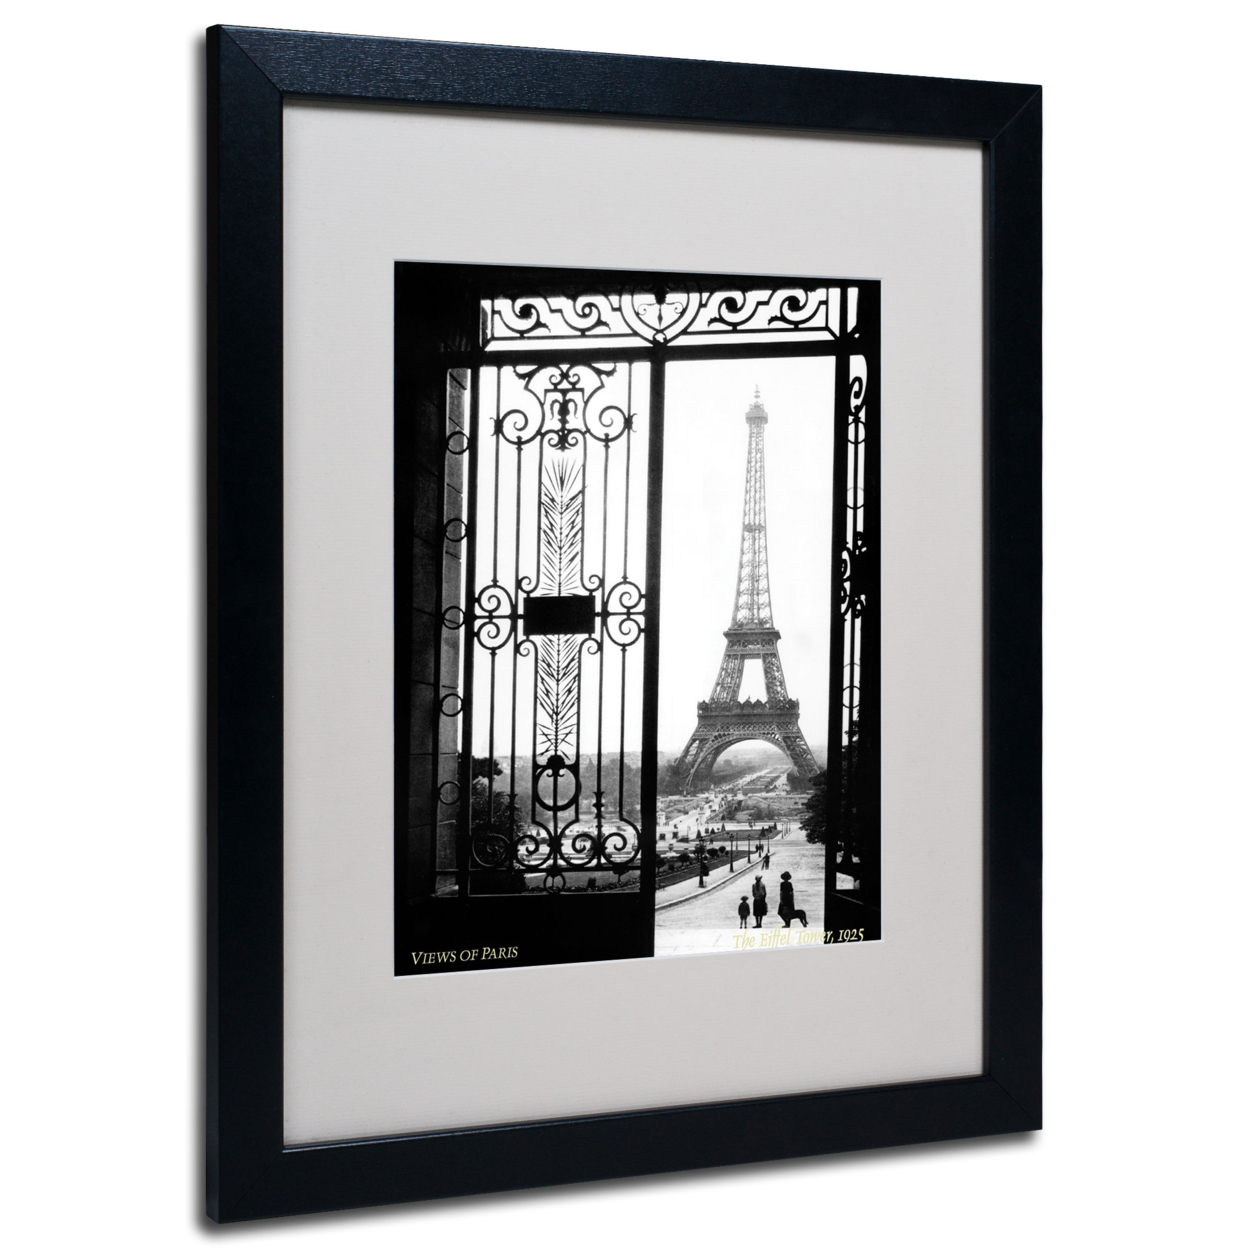 Sally Gall 'Views Of Paris' Black Wooden Framed Art 18 X 22 Inches